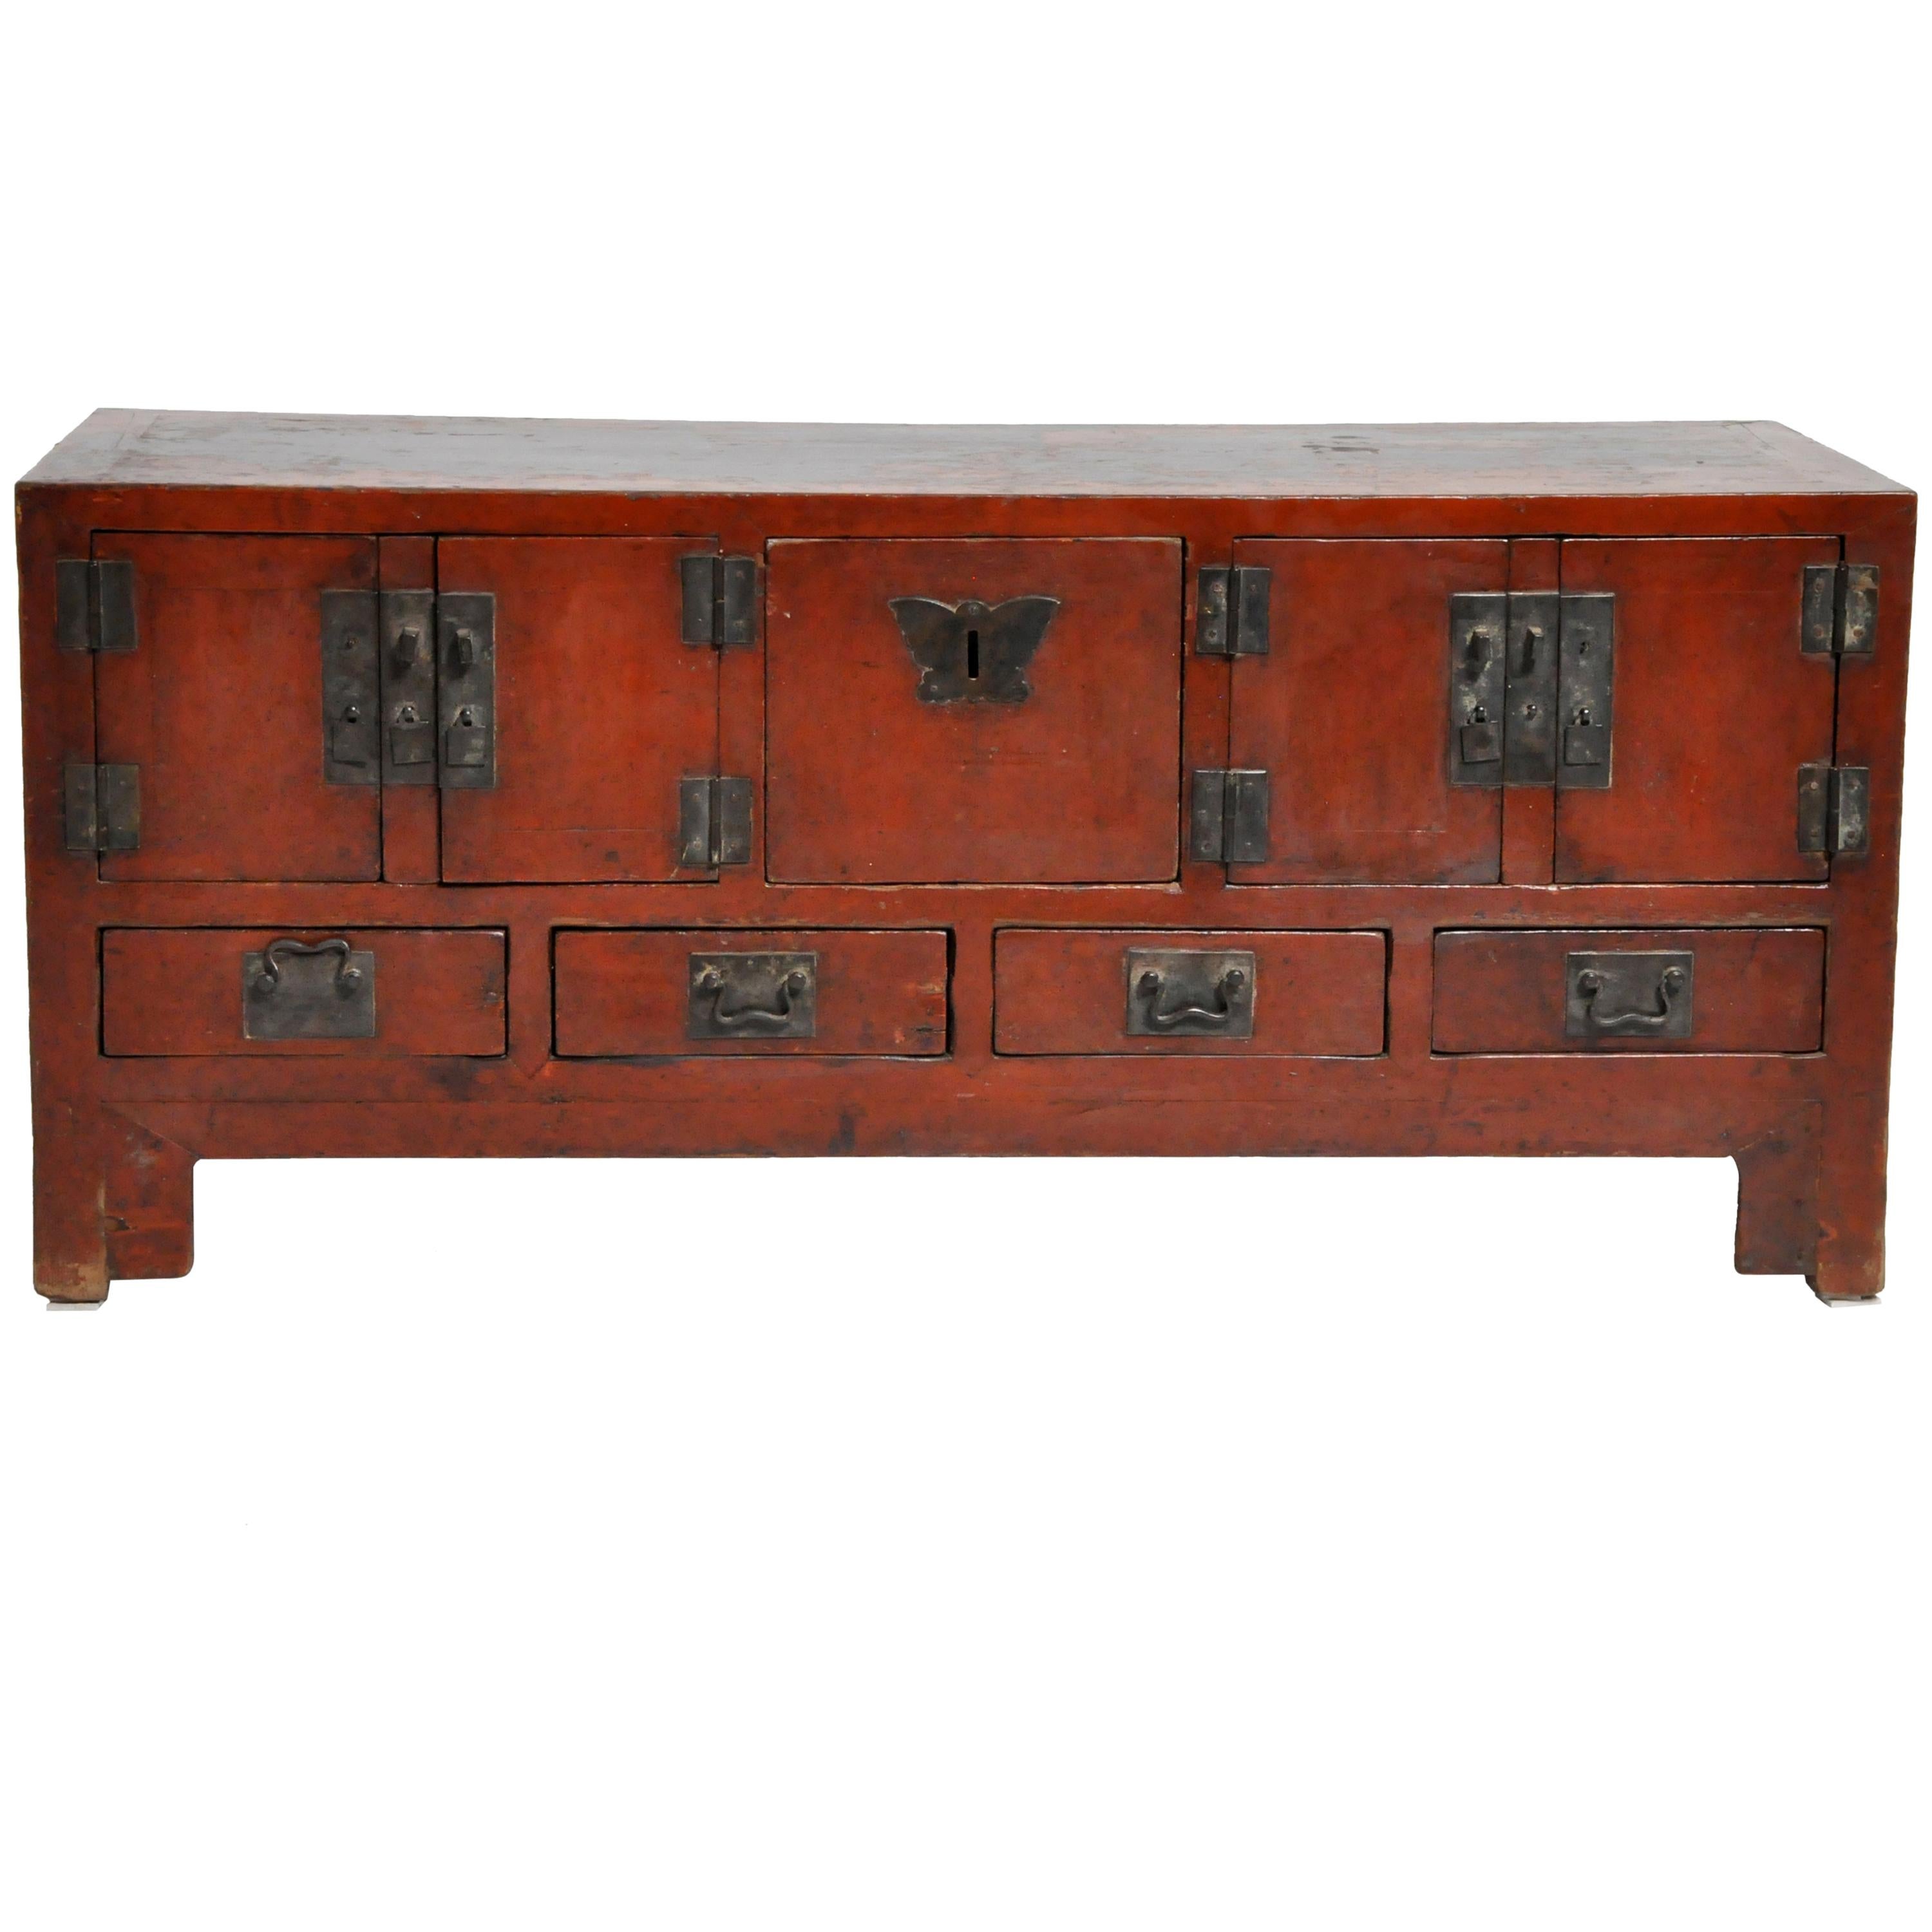 Late Qing Dynasty Tianjin Chest